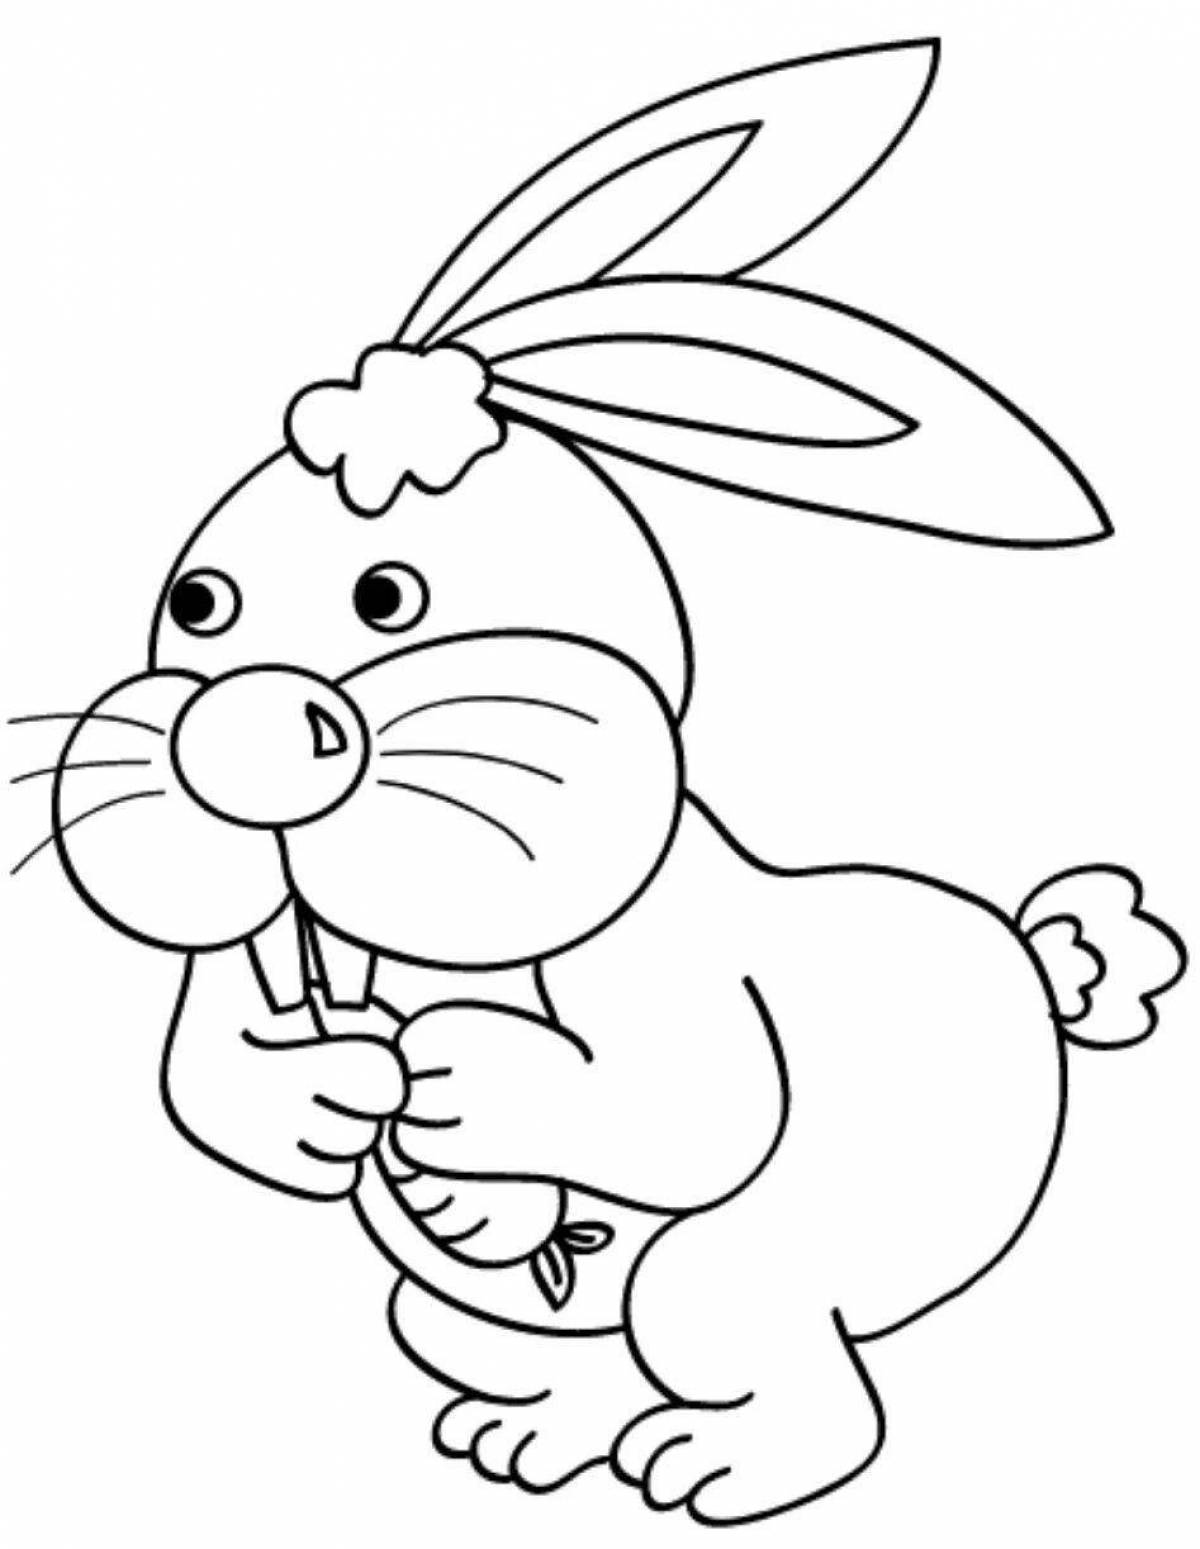 Coloring page magic hare for girls